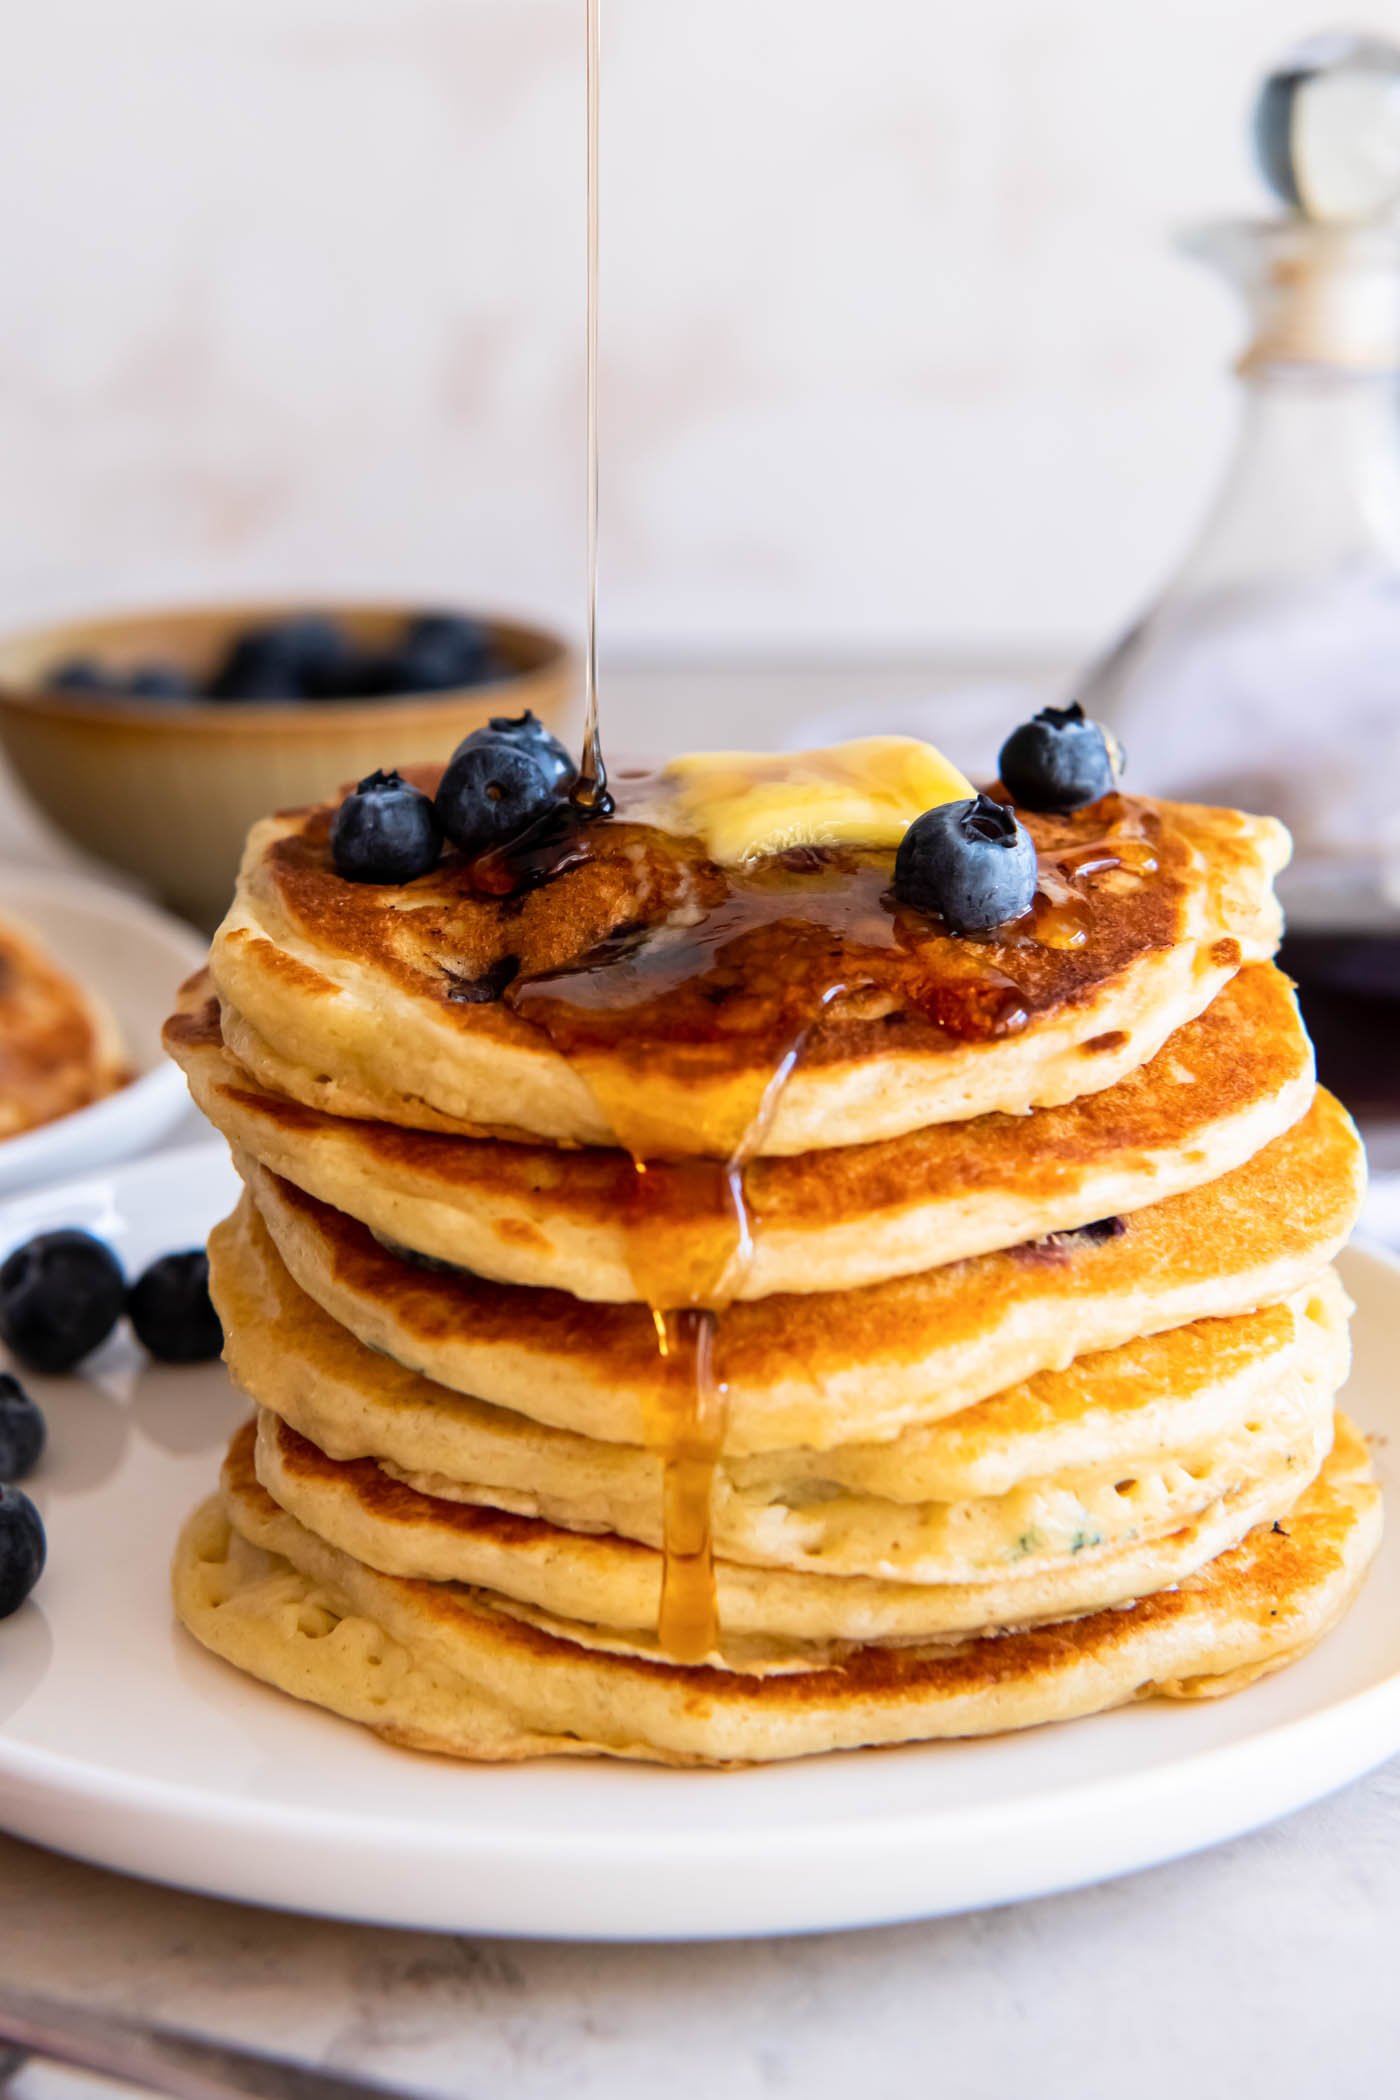 Side view of stack of blueberry pancakes with syrup being drizzled onto them.